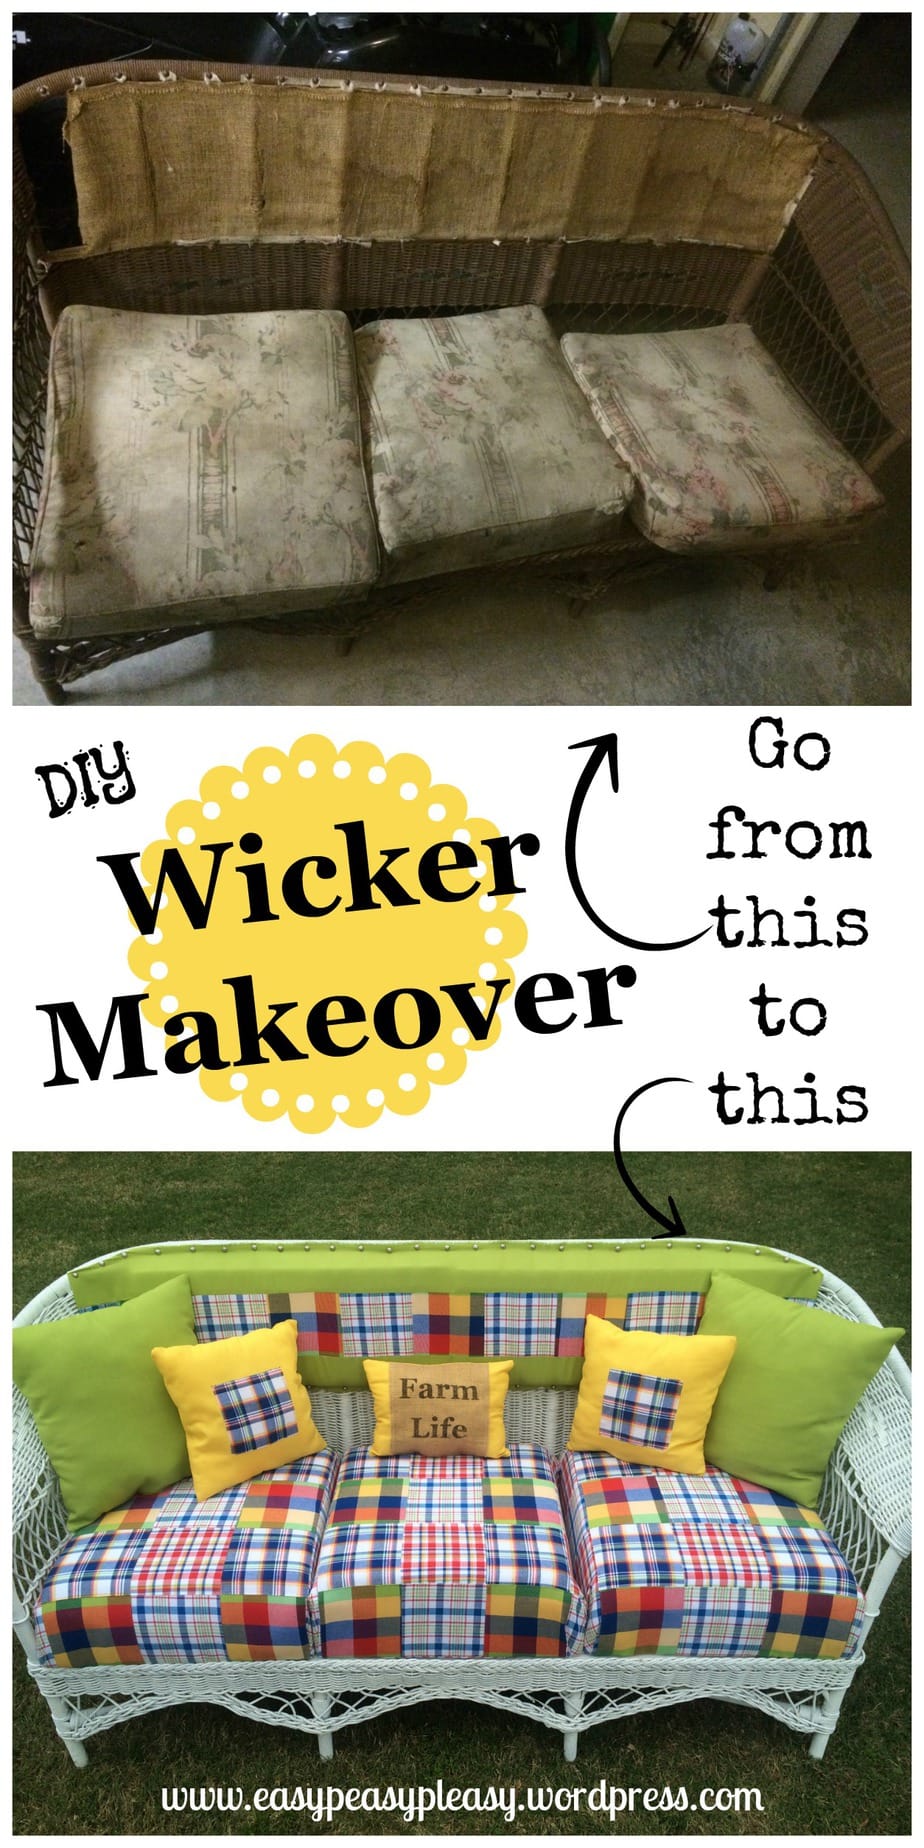 DIY Wicker Makeover and tutorial to make wicker look like new